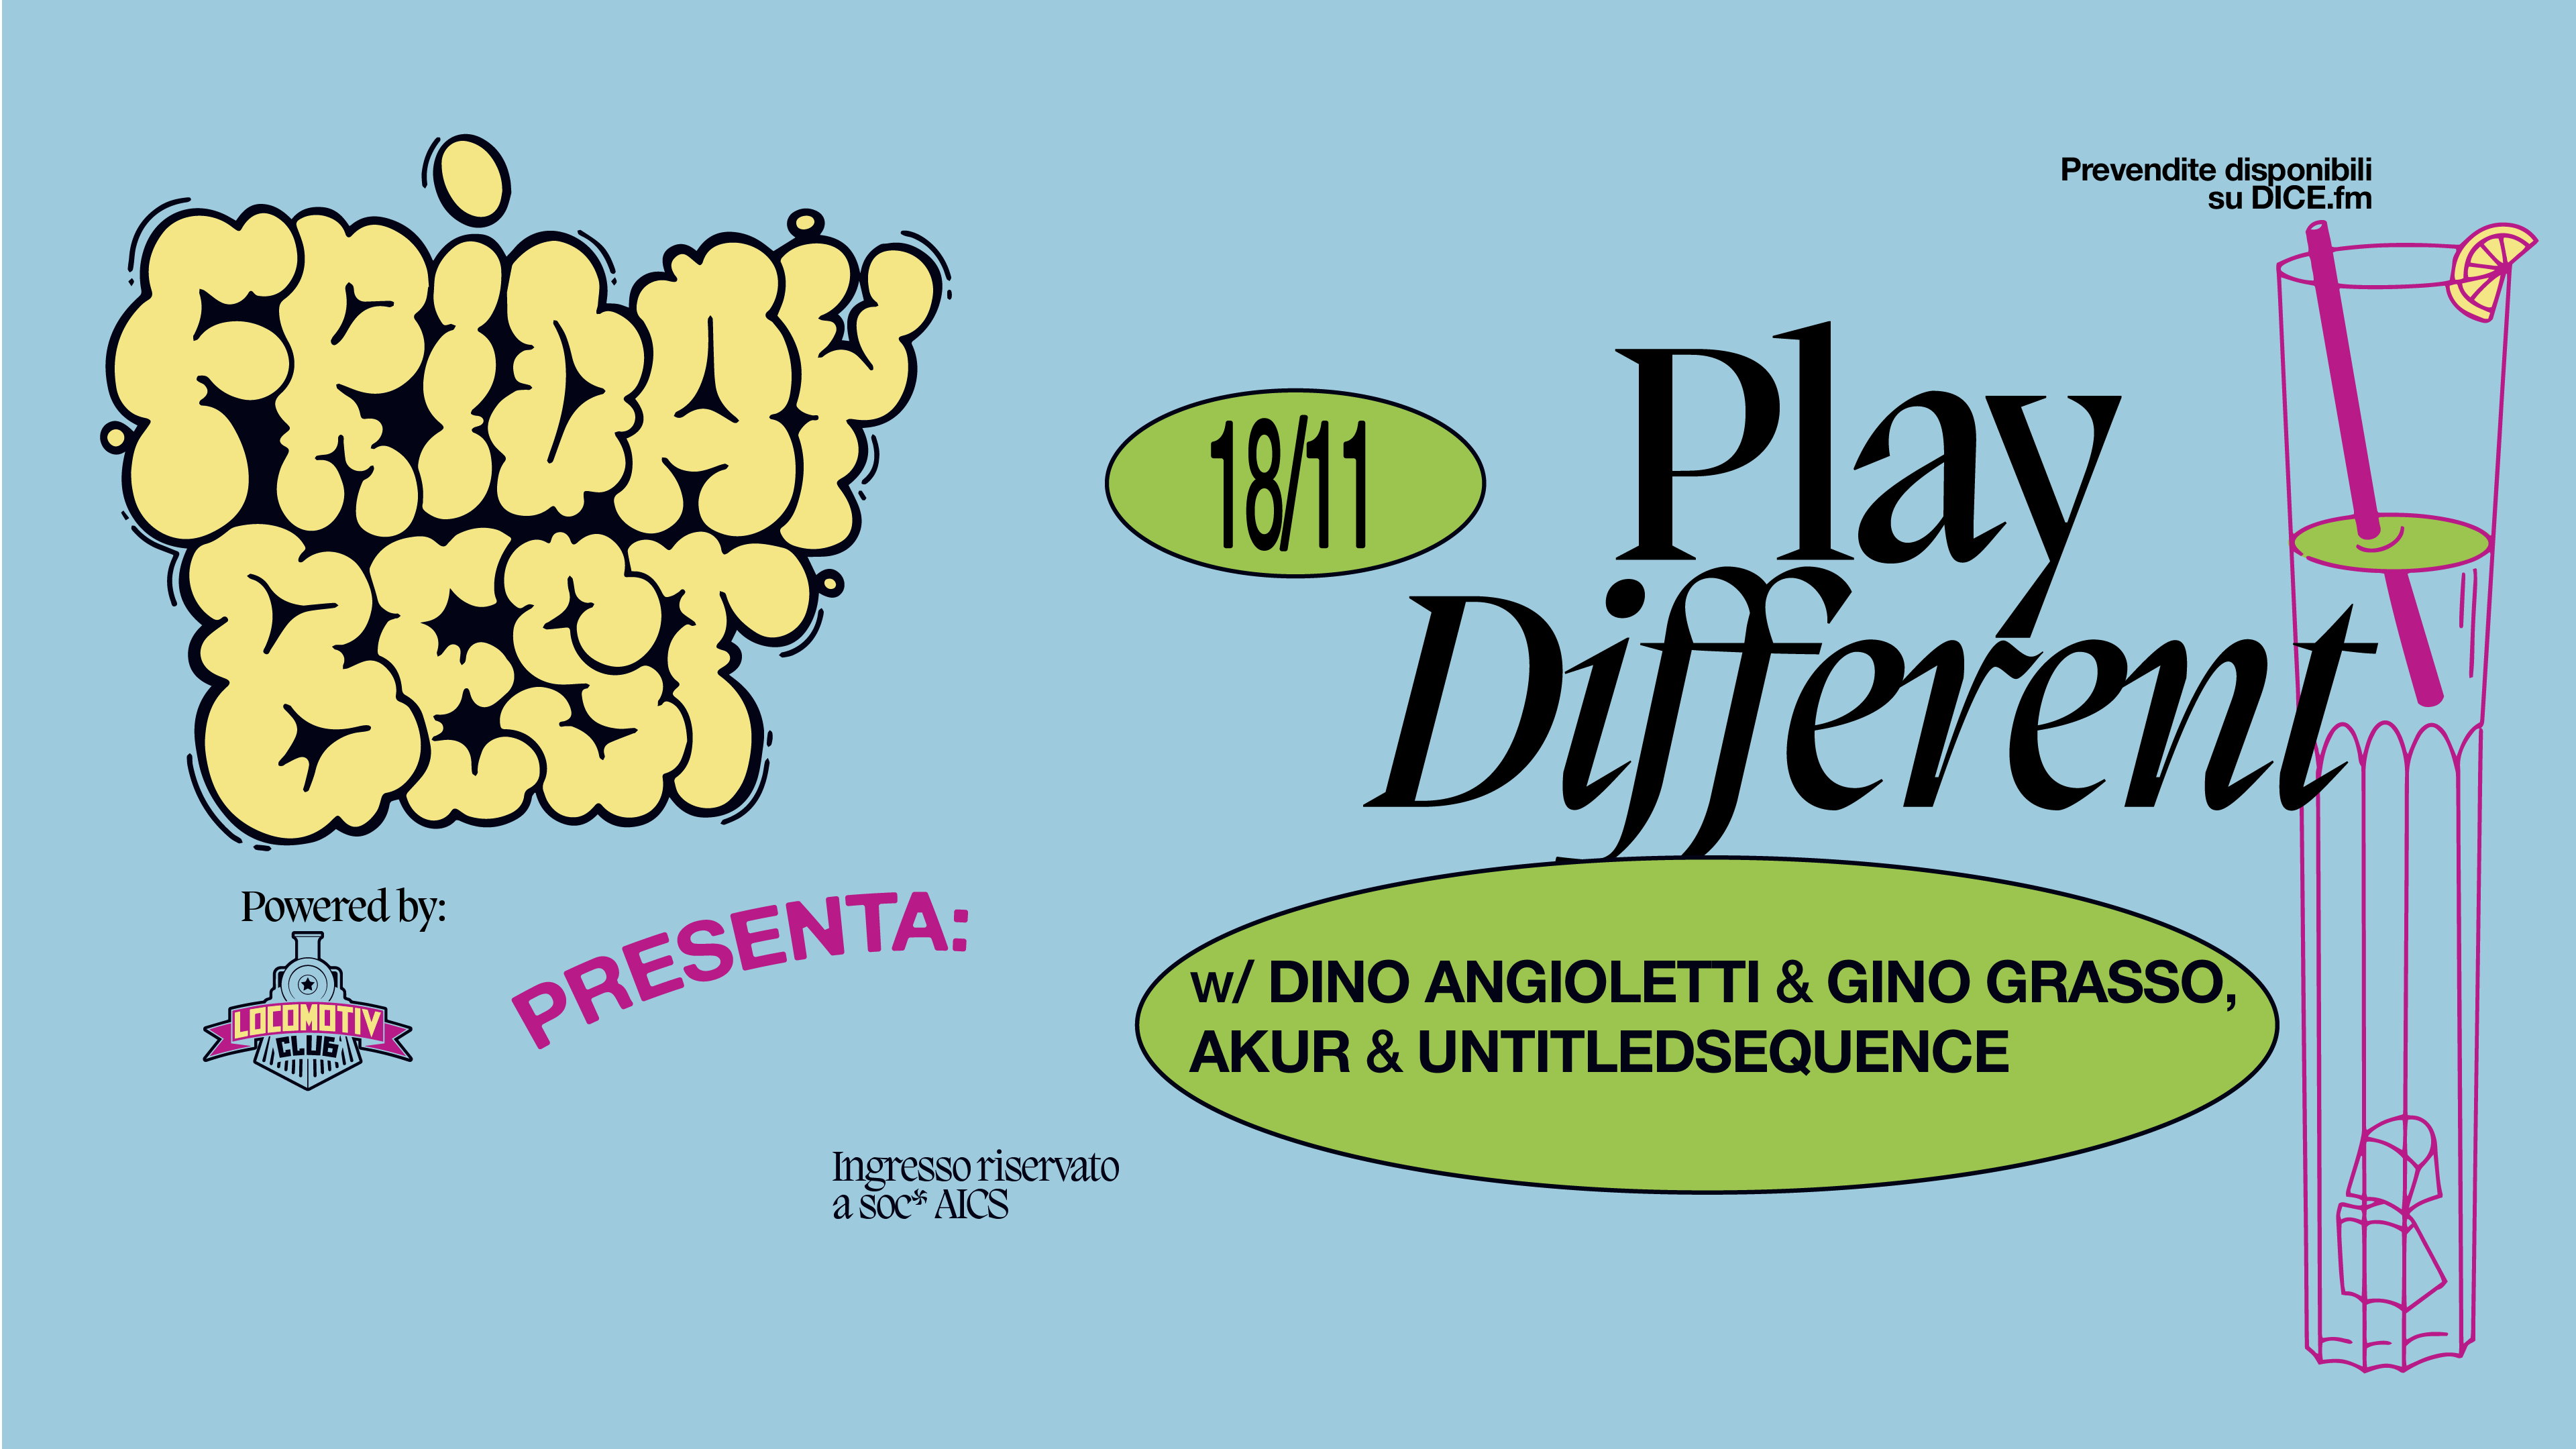 Play Different! with Dino Angioletti & Gino Grasso, Akur & Untitledsequence - フライヤー表